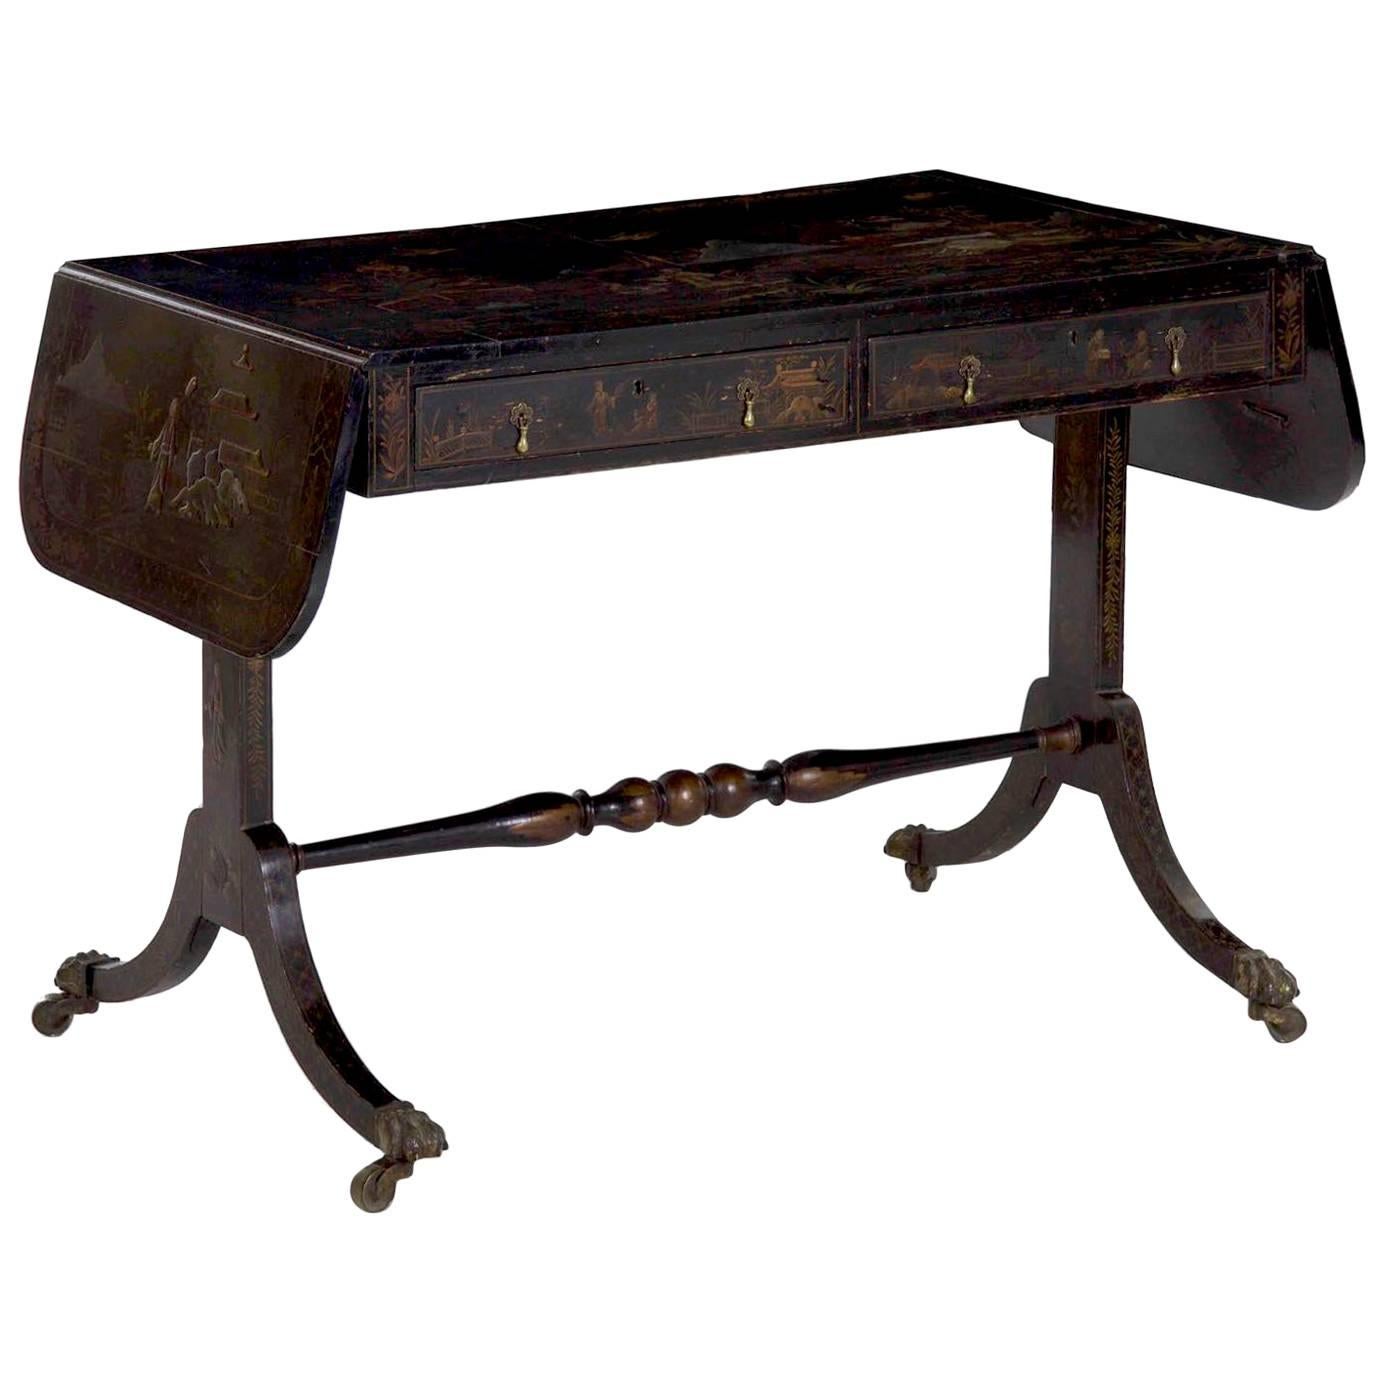 19th Century English Regency Chinoiserie Decorated Sofa Table